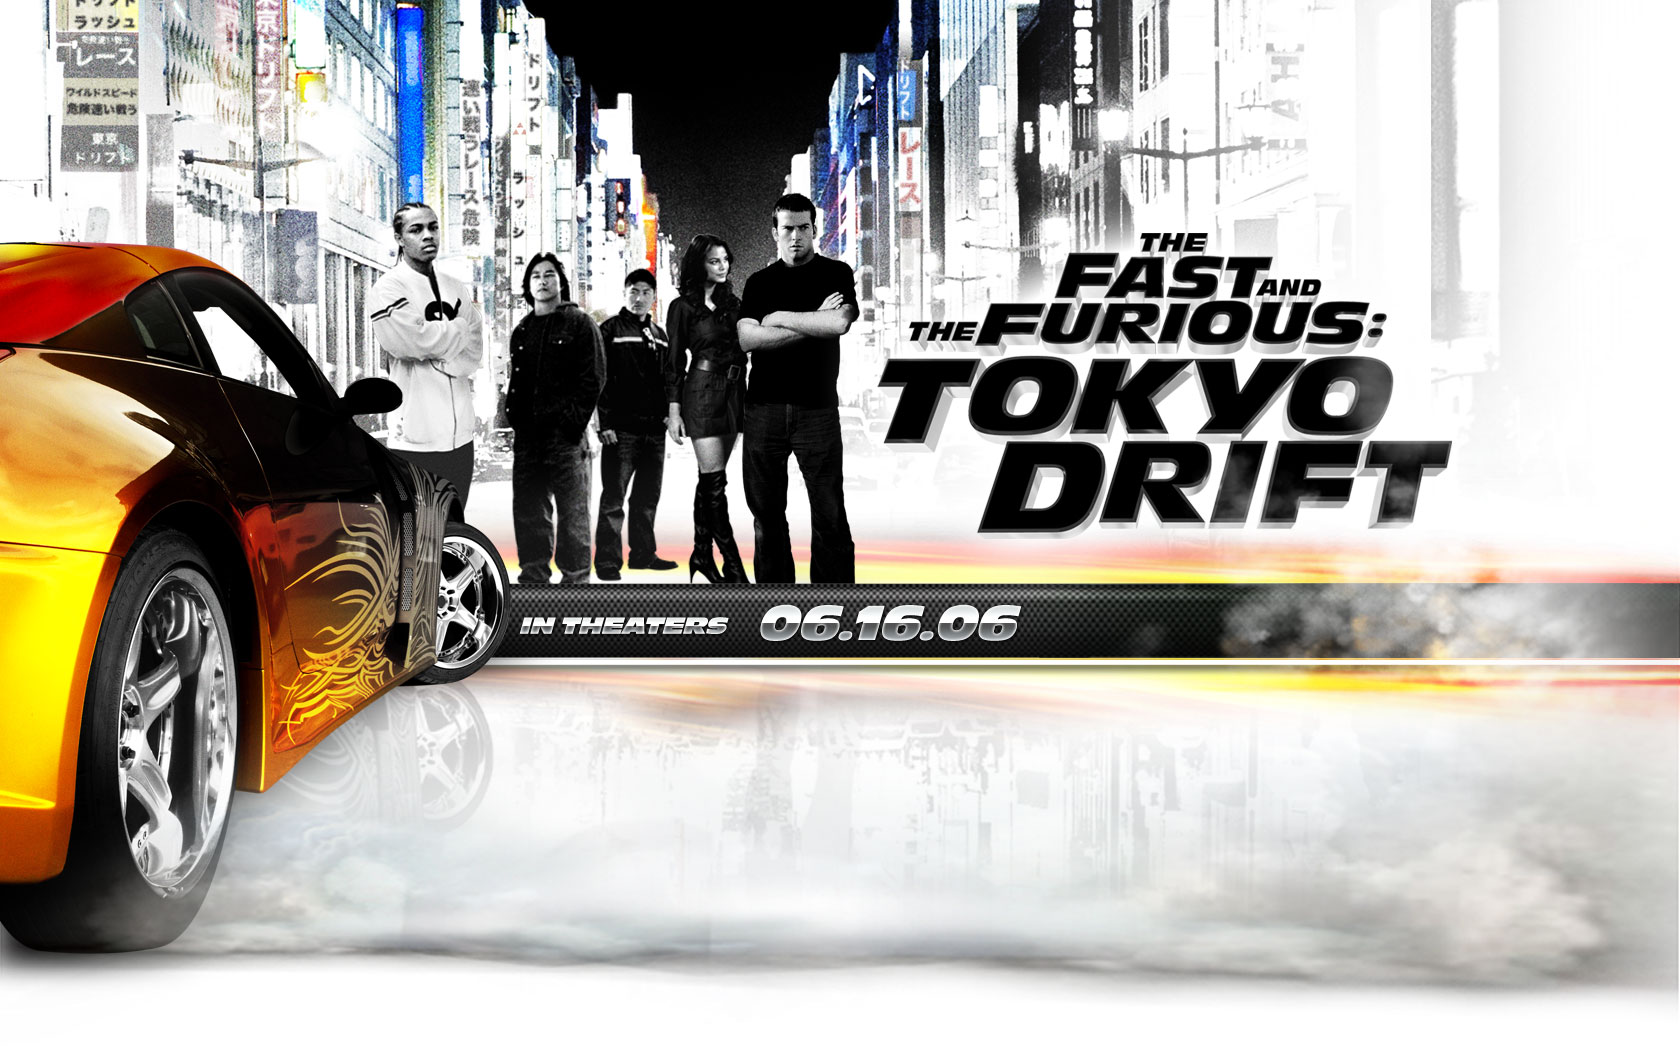 The Fast And The Furious: Tokyo Drift HD wallpapers, Desktop wallpaper - most viewed